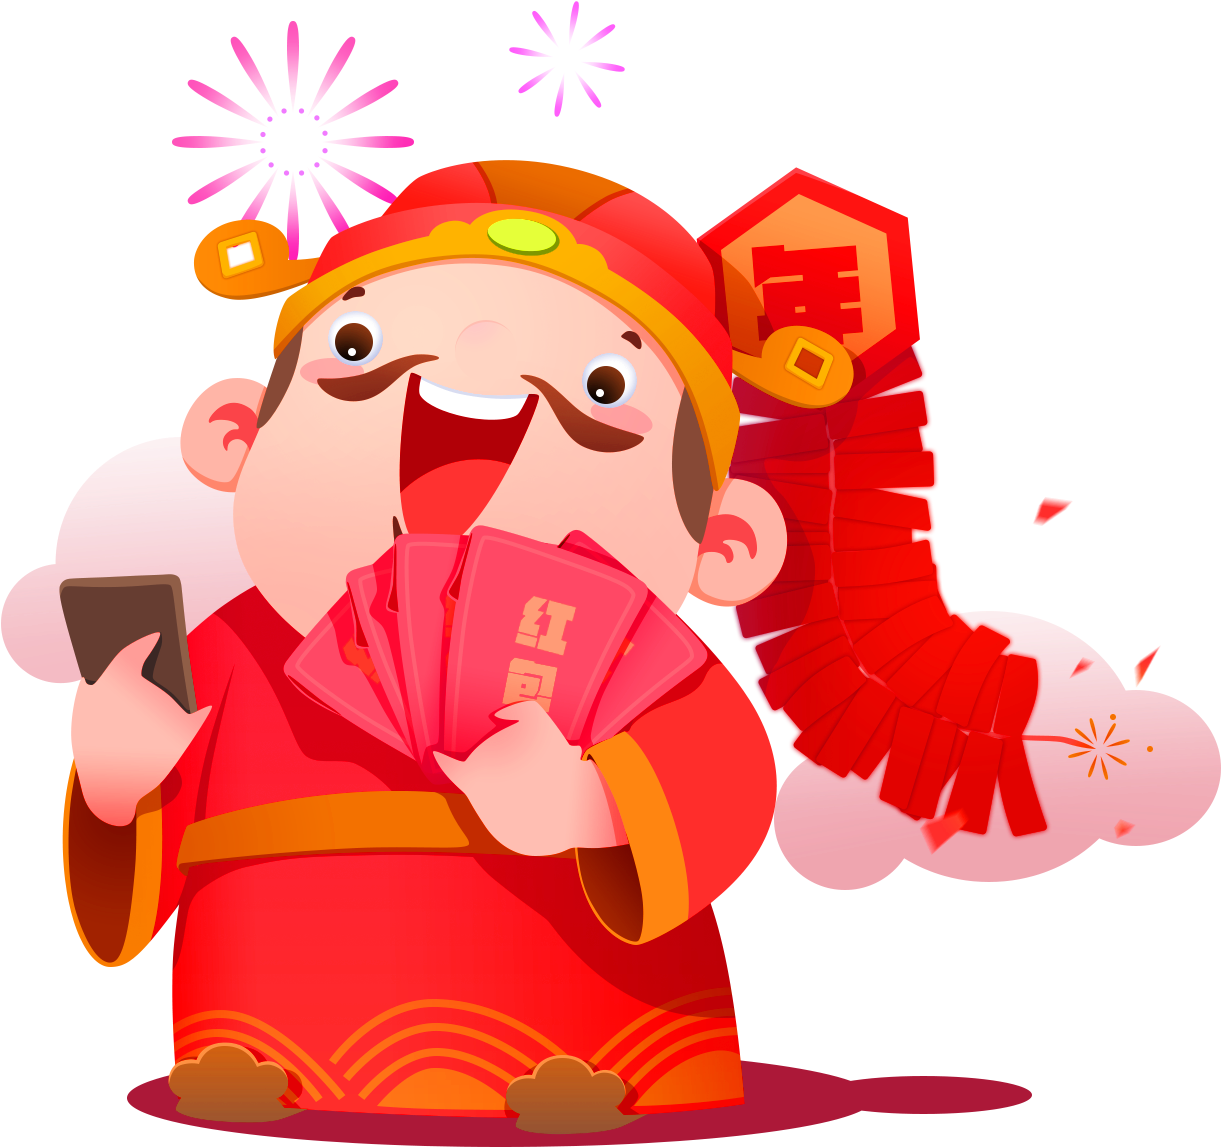 Chinese New Year Red Envelope Firecracker - Caishen (1720x1600)